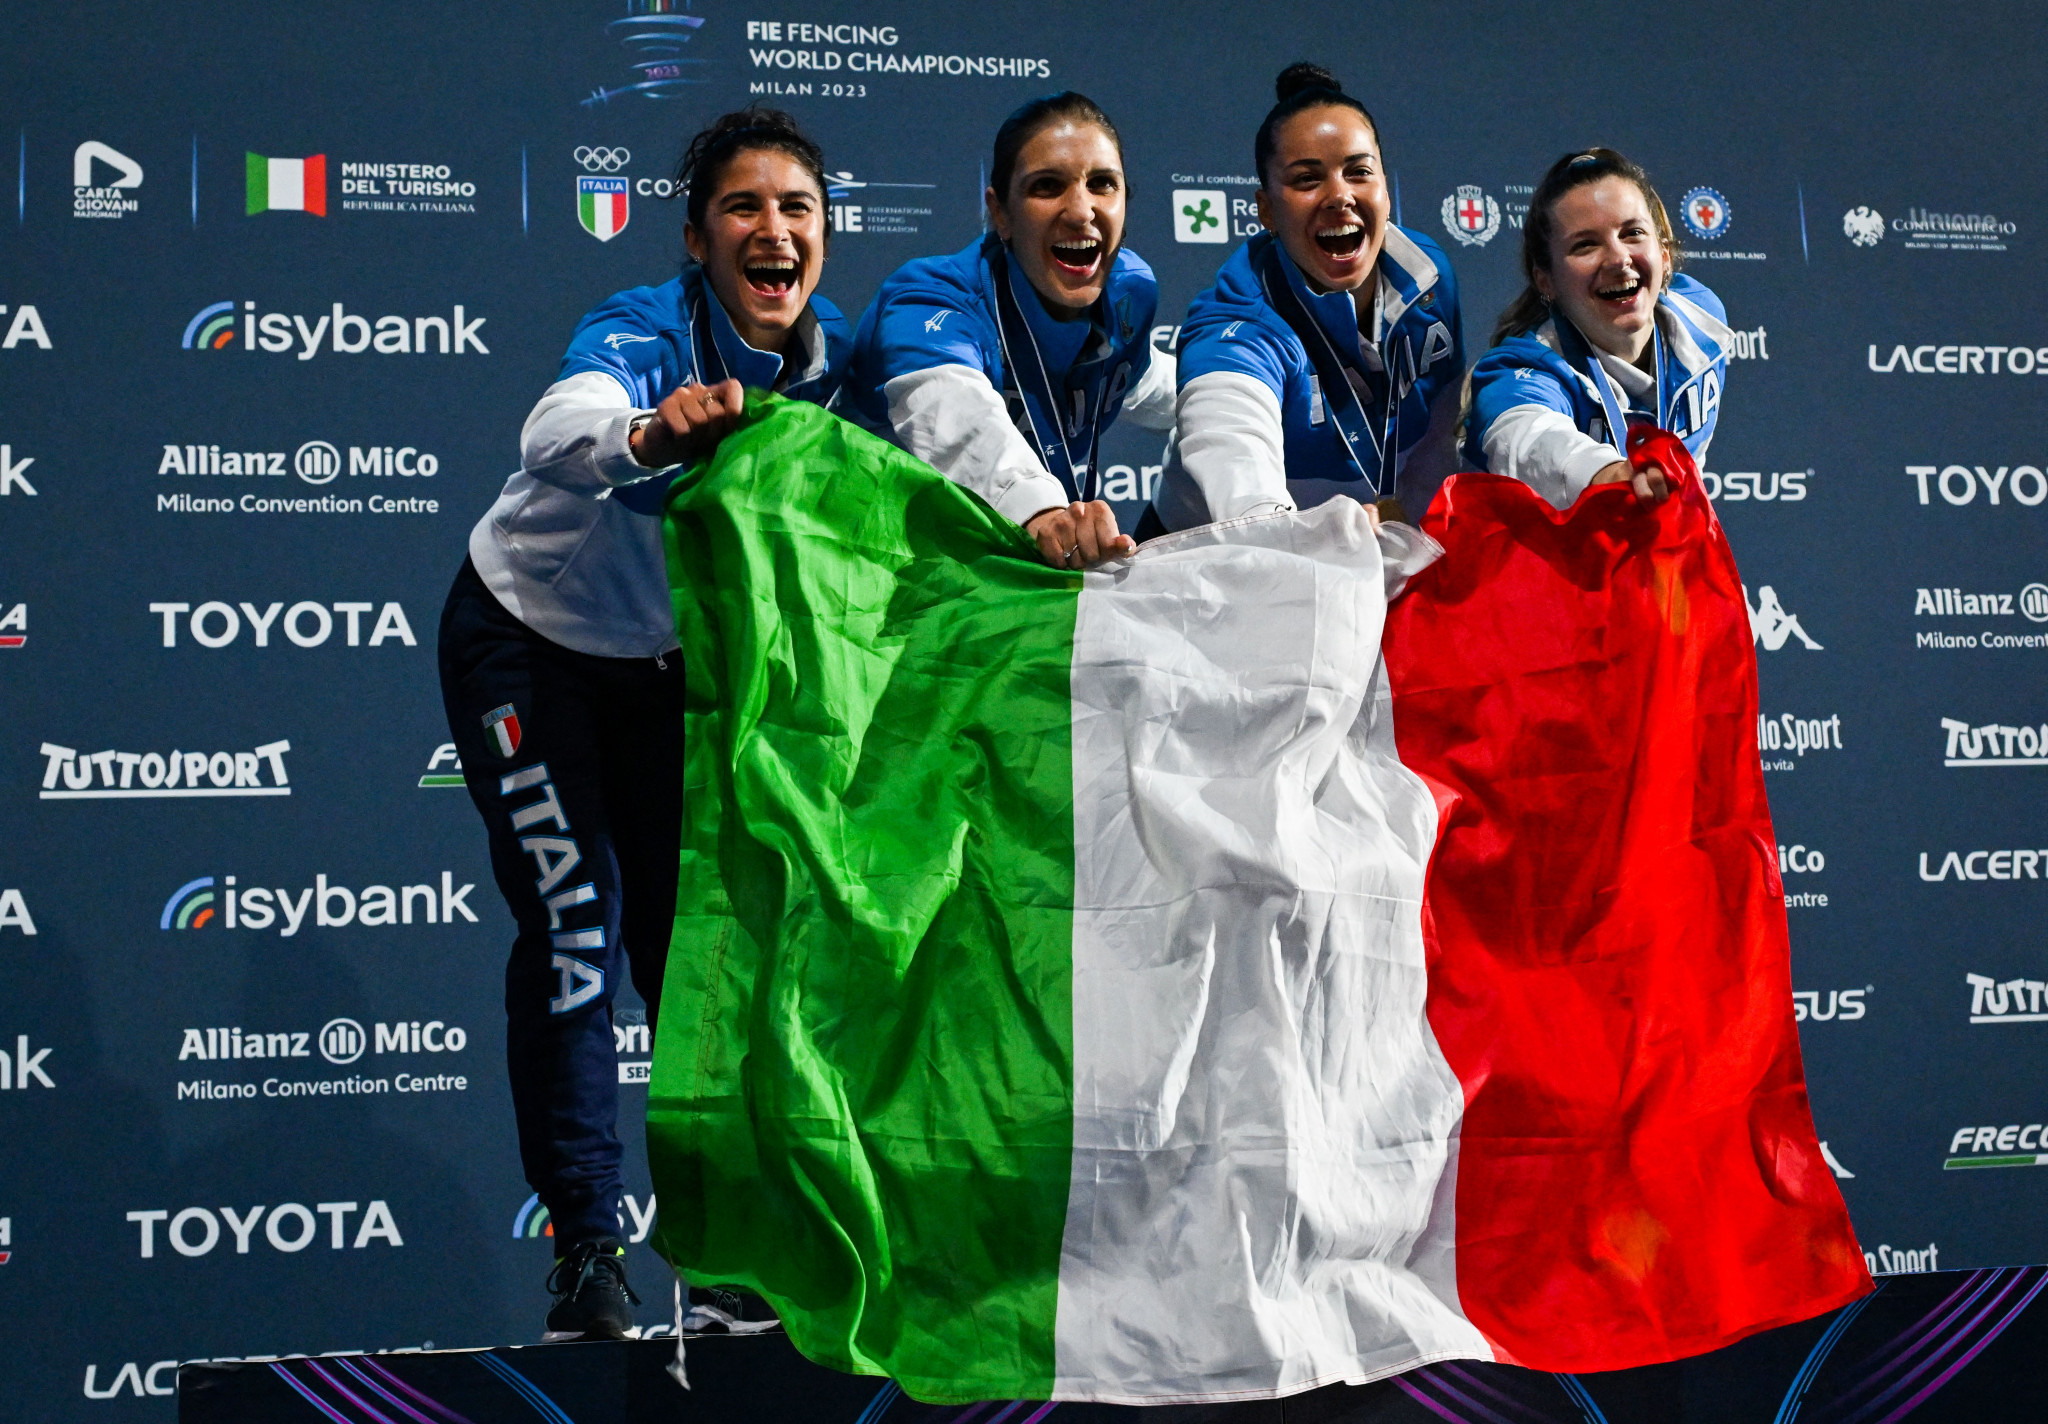 Double team success for hosts Italy at FIE Fencing World Championships in Milan